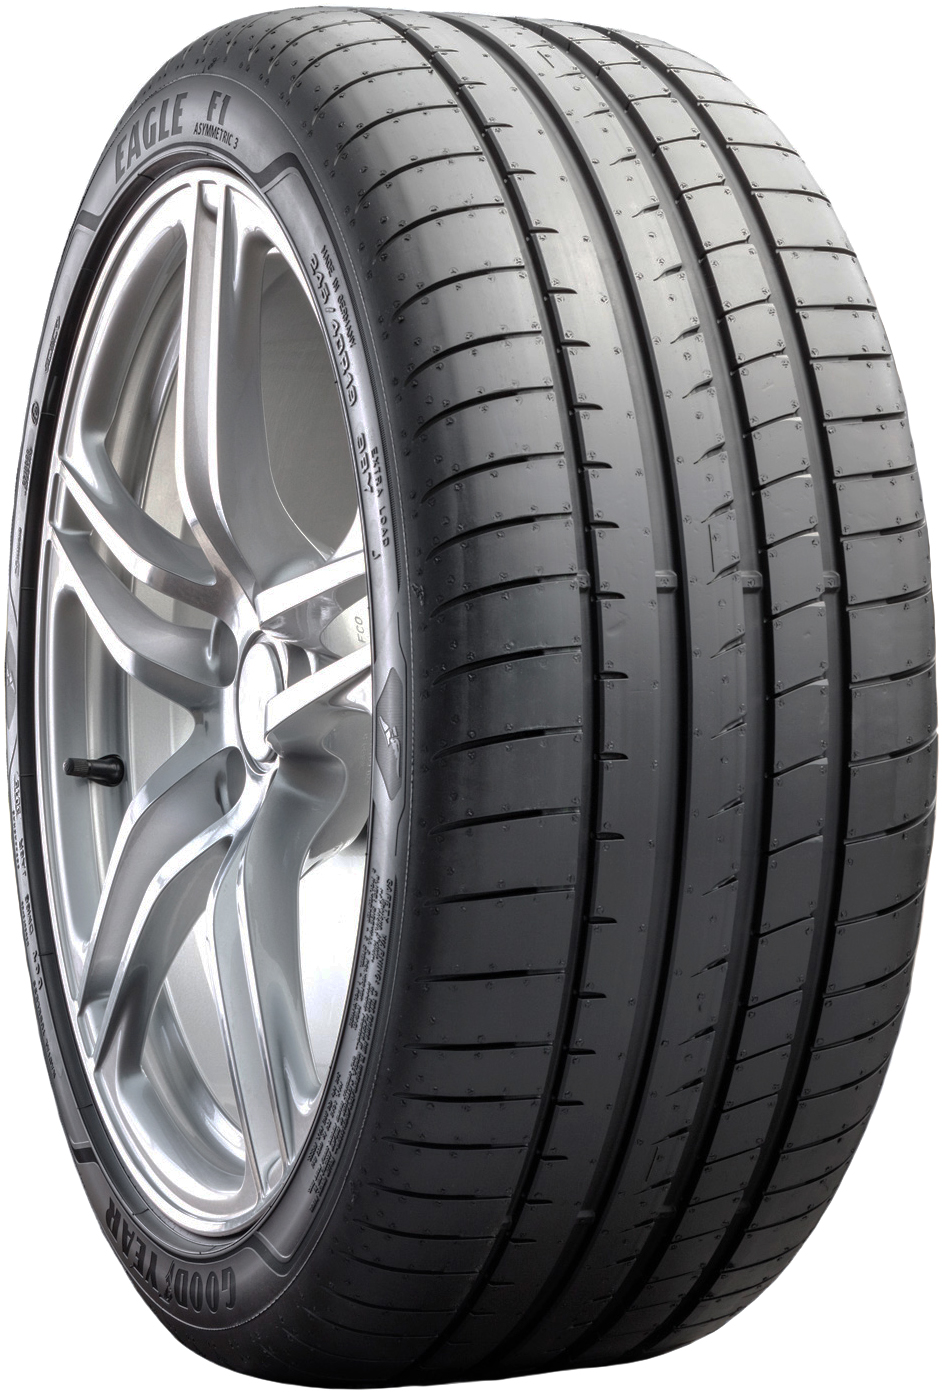 Anvelope auto GOODYEAR EAGF1AS3NF XL 305/30 R21 104Y